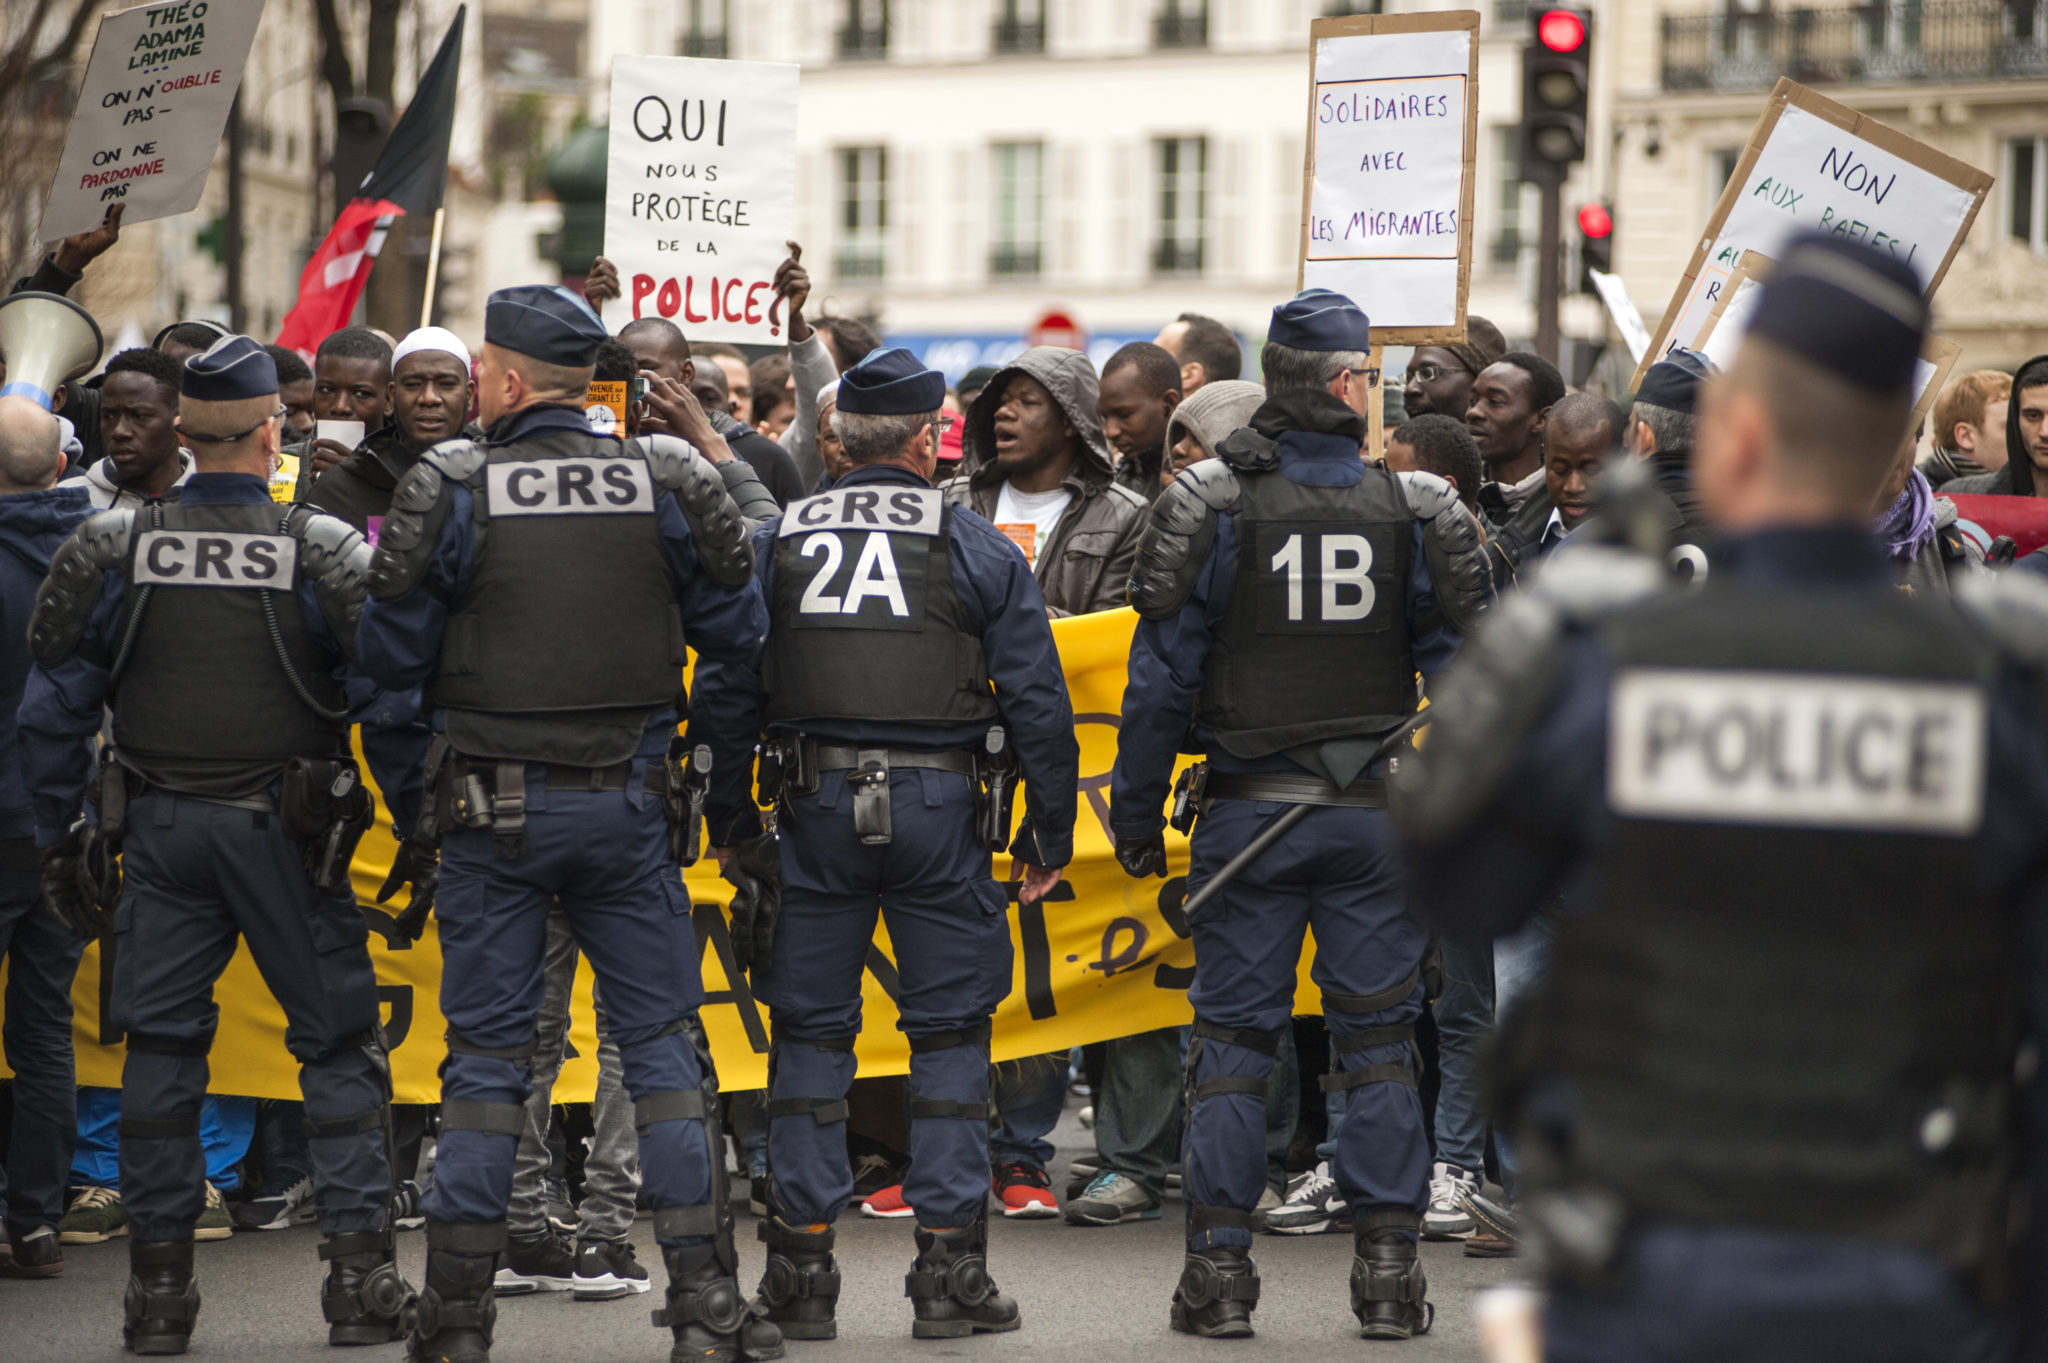 A right not a threat: Disproportionate restrictions on demonstrations under the State of Emergency in France